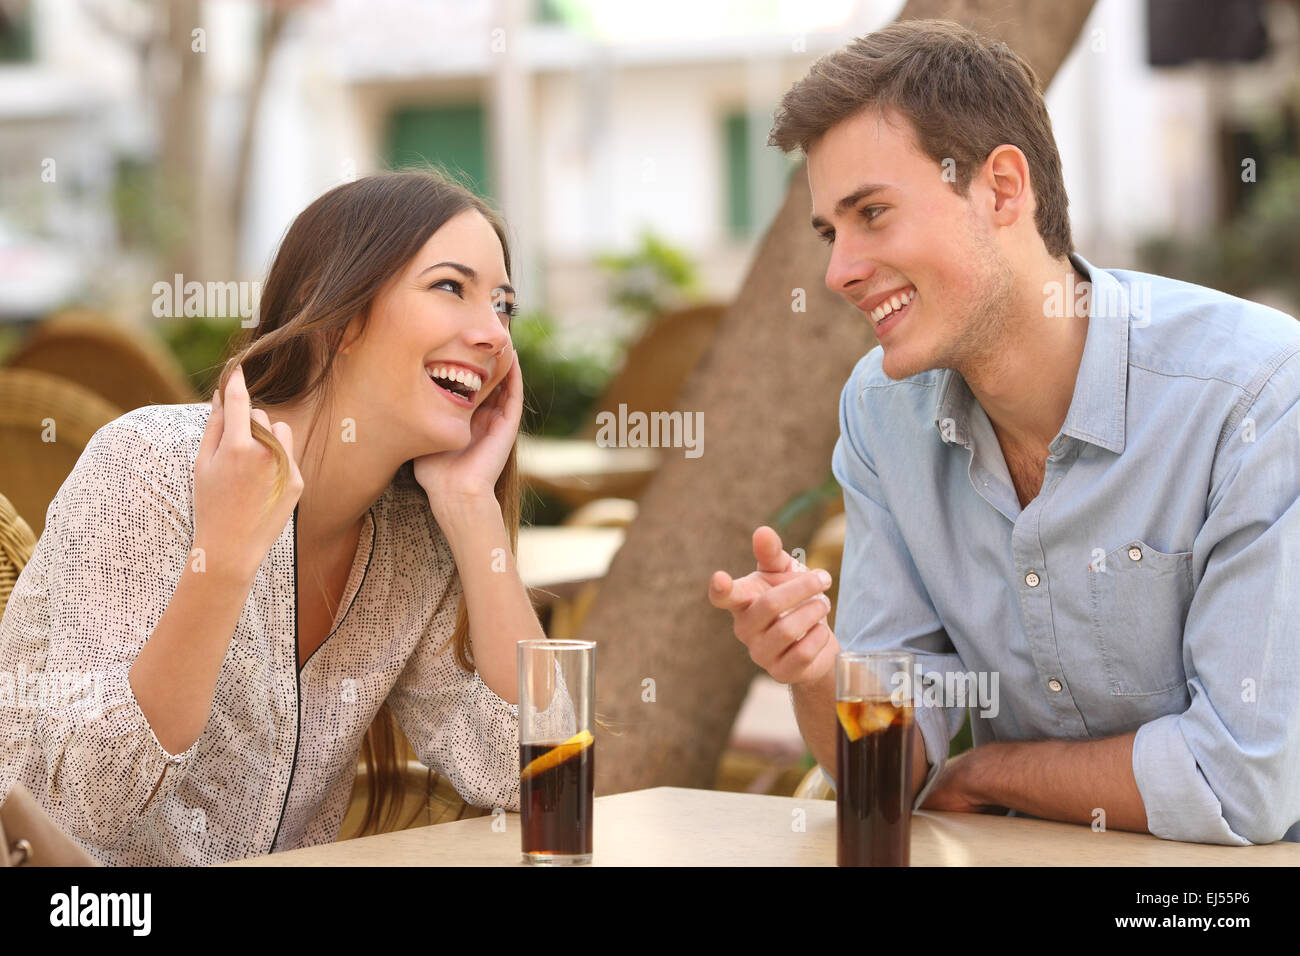 Couple dating and flirting while taking a conversation and looking each other in a restaurant Stock Photo